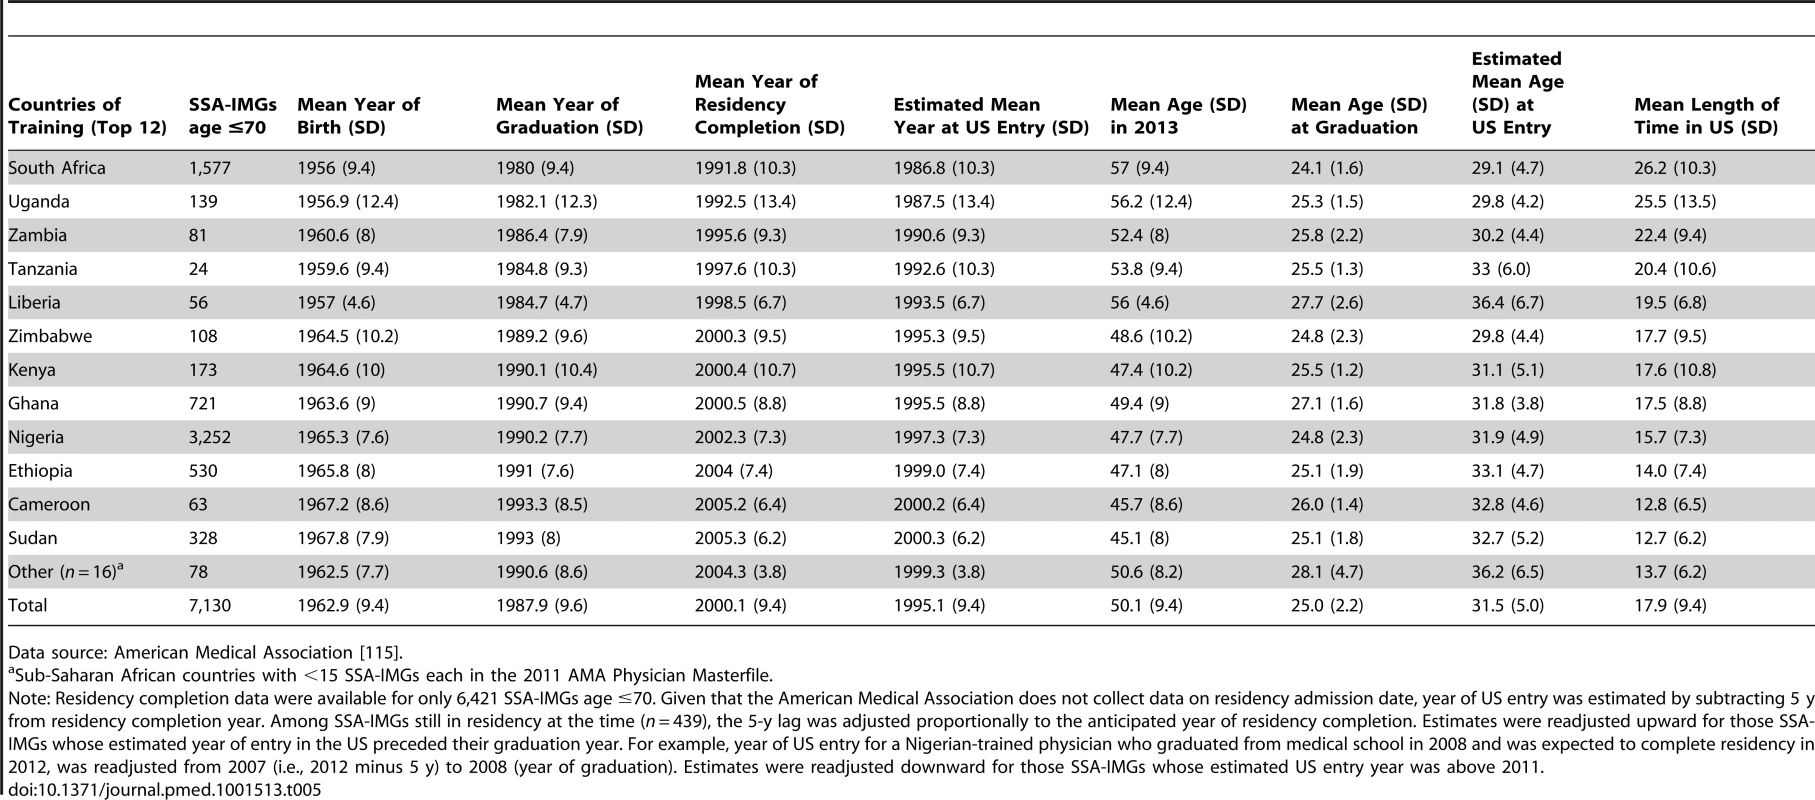 Birth, graduation, residency completion, and estimated US entry years among Sub-Saharan African-trained medical graduates (SSA-IMGs) appearing in the US physician workforce in 2011.